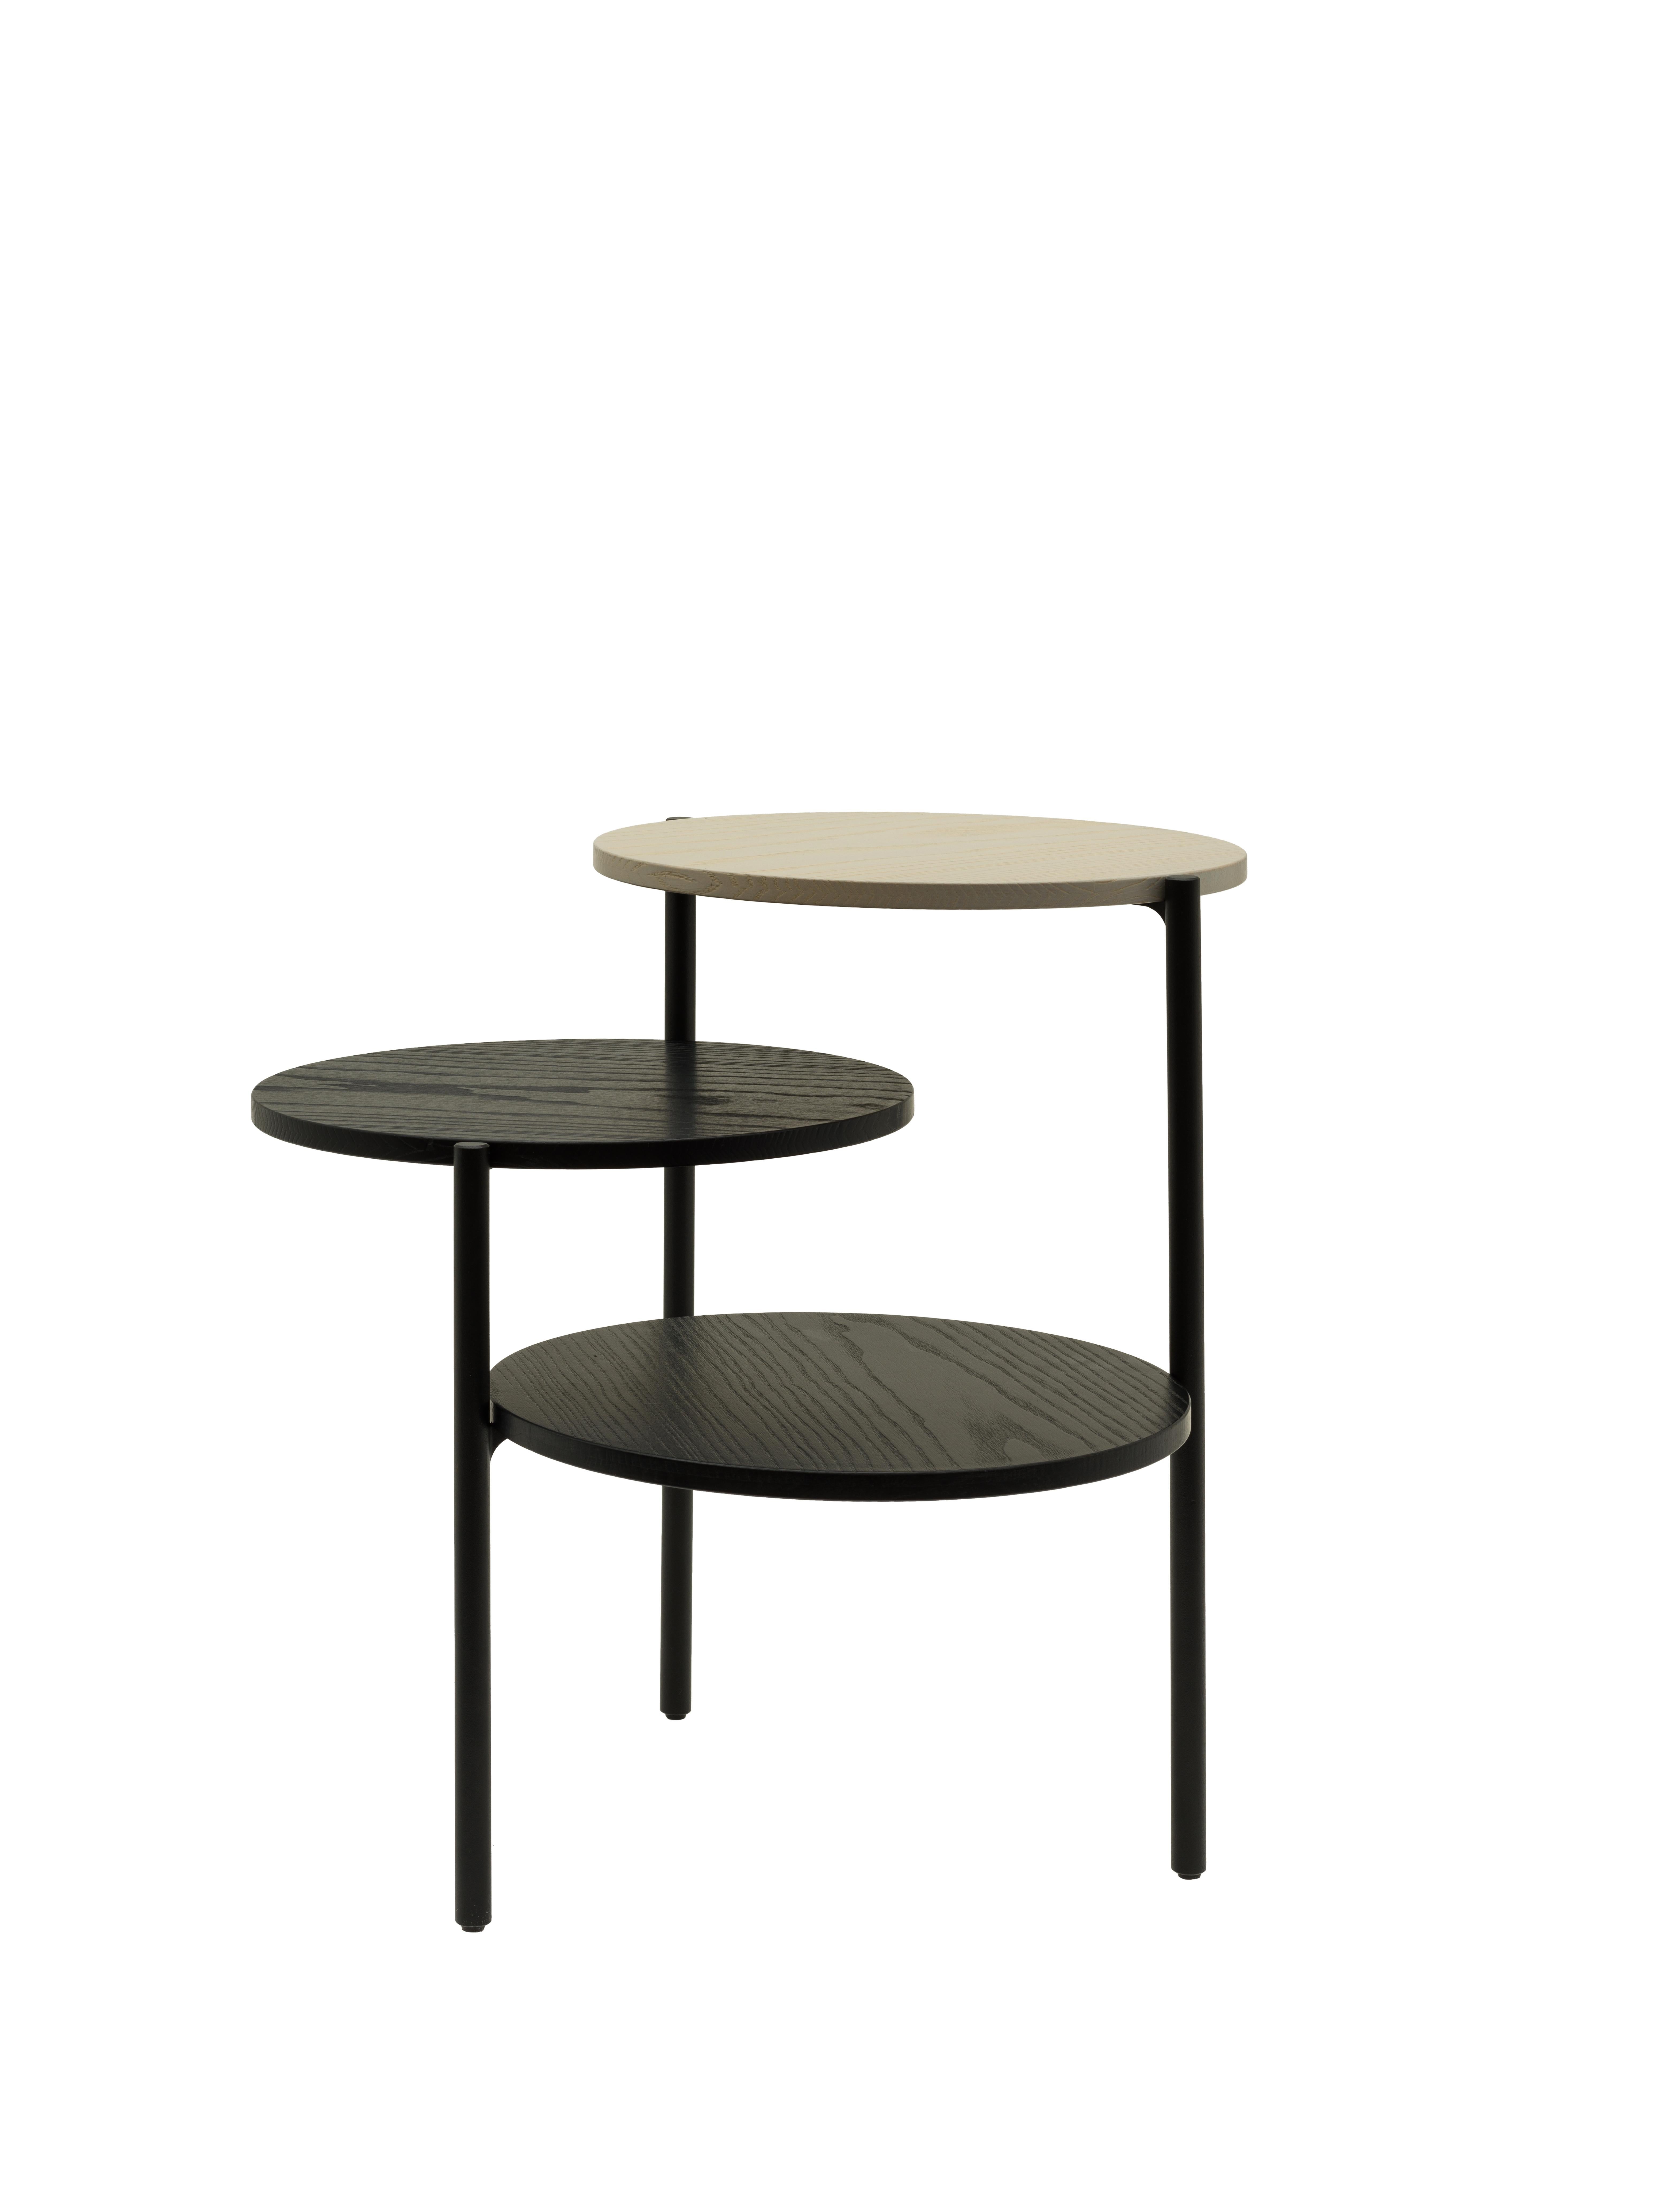 Black & Grey triplo table by Mason Editions
Dimensions: 54 × 54 × 52.5 cm
Materials: iron, ash
Colours: total black, total blue, total light grey, blue + coral, black + light grey, light grey + pumpkin

This side table is based on the concept of